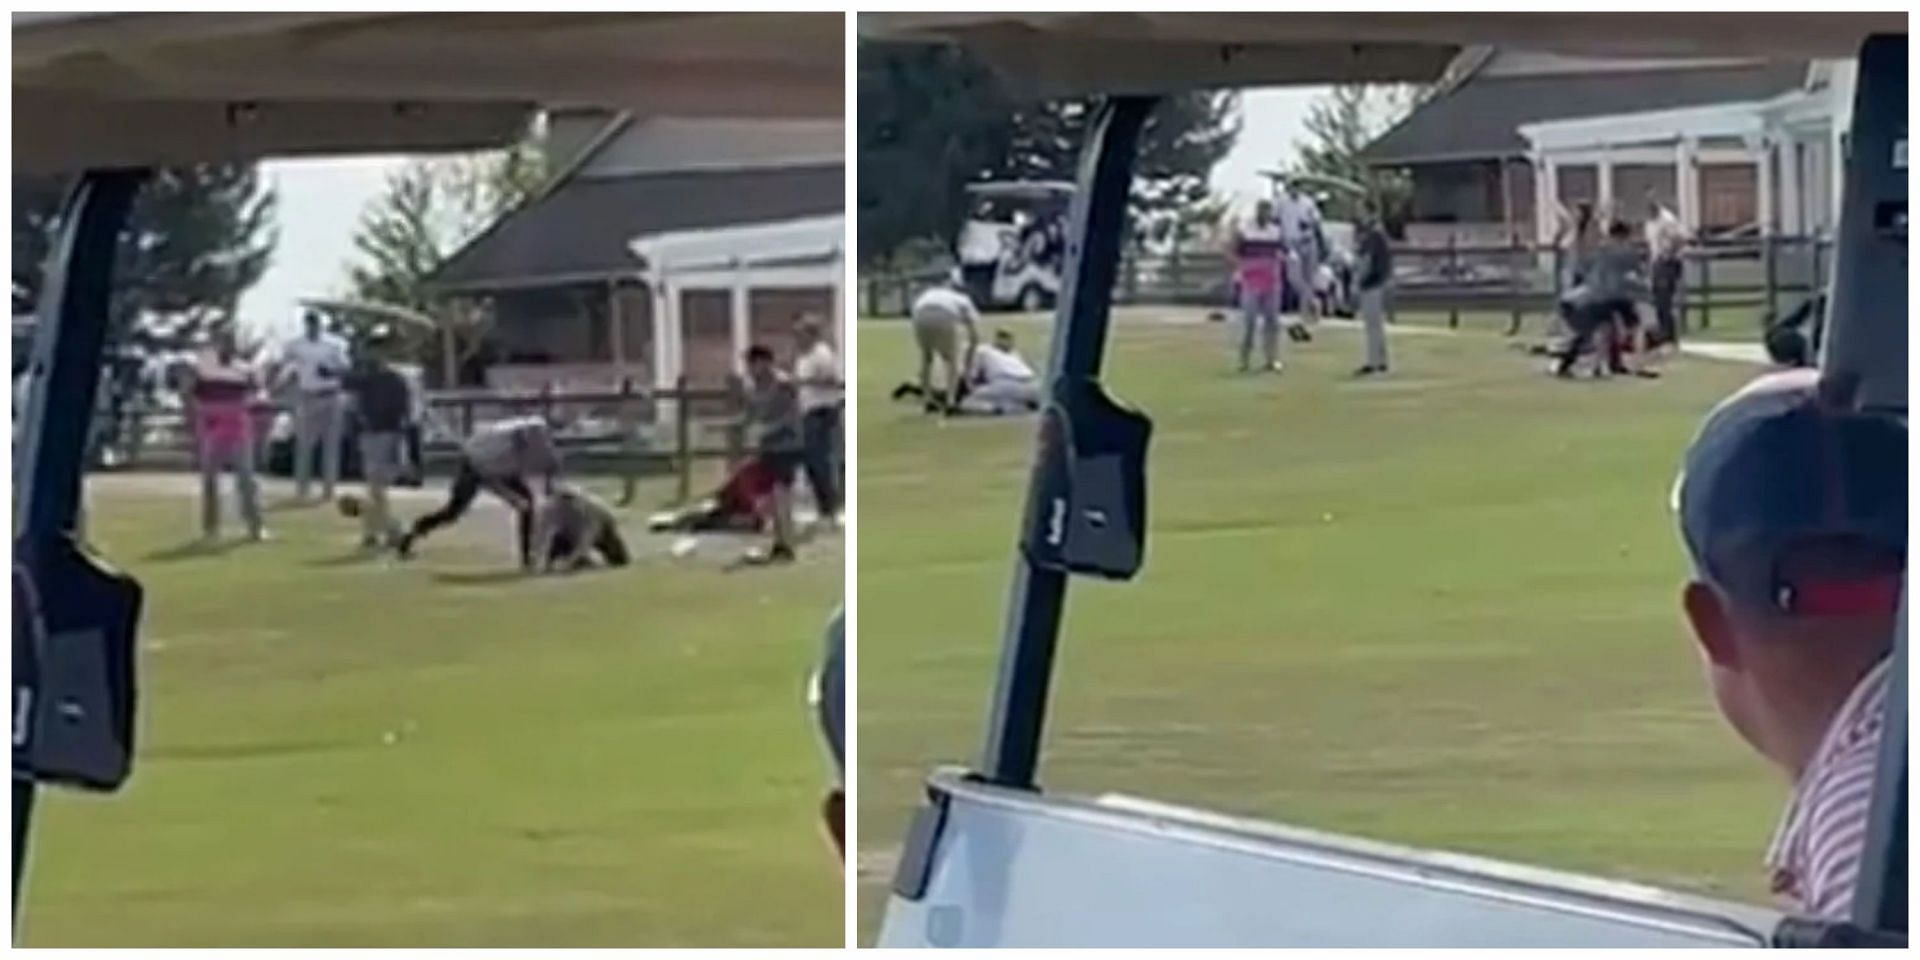 Video from golf course at Bailey Ranch stuns social media users as netizens were shocked to see the alleged altercation between former MMA fighters and civilians. (Image via @TJ Eckert / Twitter)